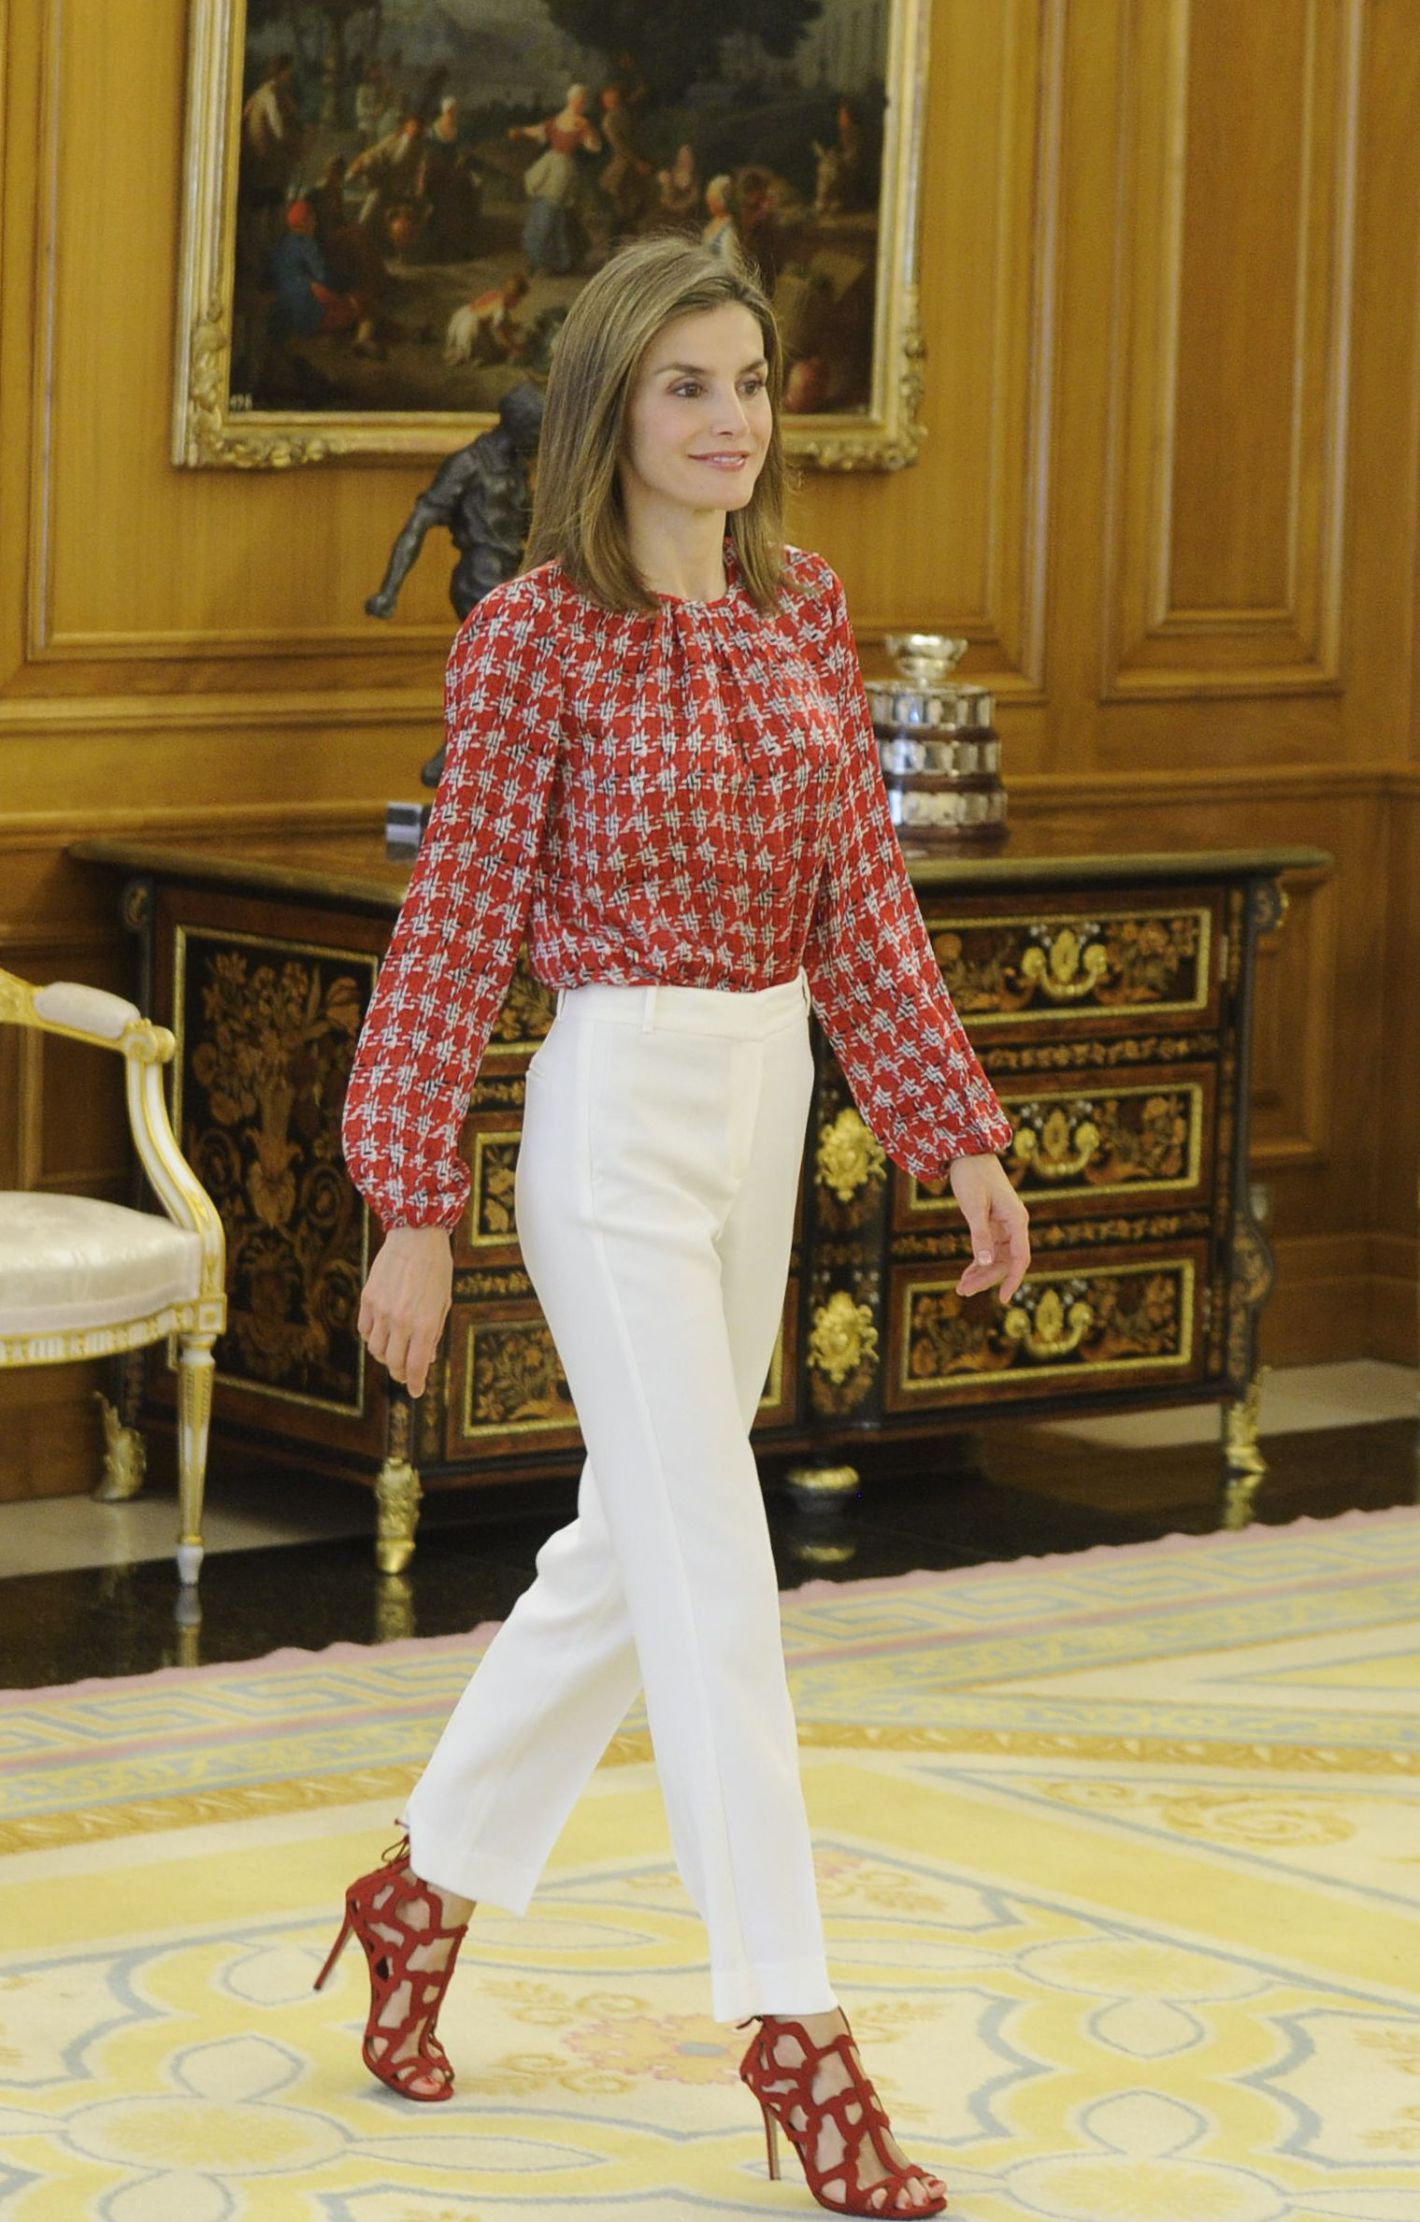 Mandatory Credit: Photo by Belen Diaz/DYDPPA/REX/Shutterstock (6272162c) Queen Letizia of Spain The National Executive Council of the Spanish Association Against Cancer, Madrid, Spain - 09 Sep 2016